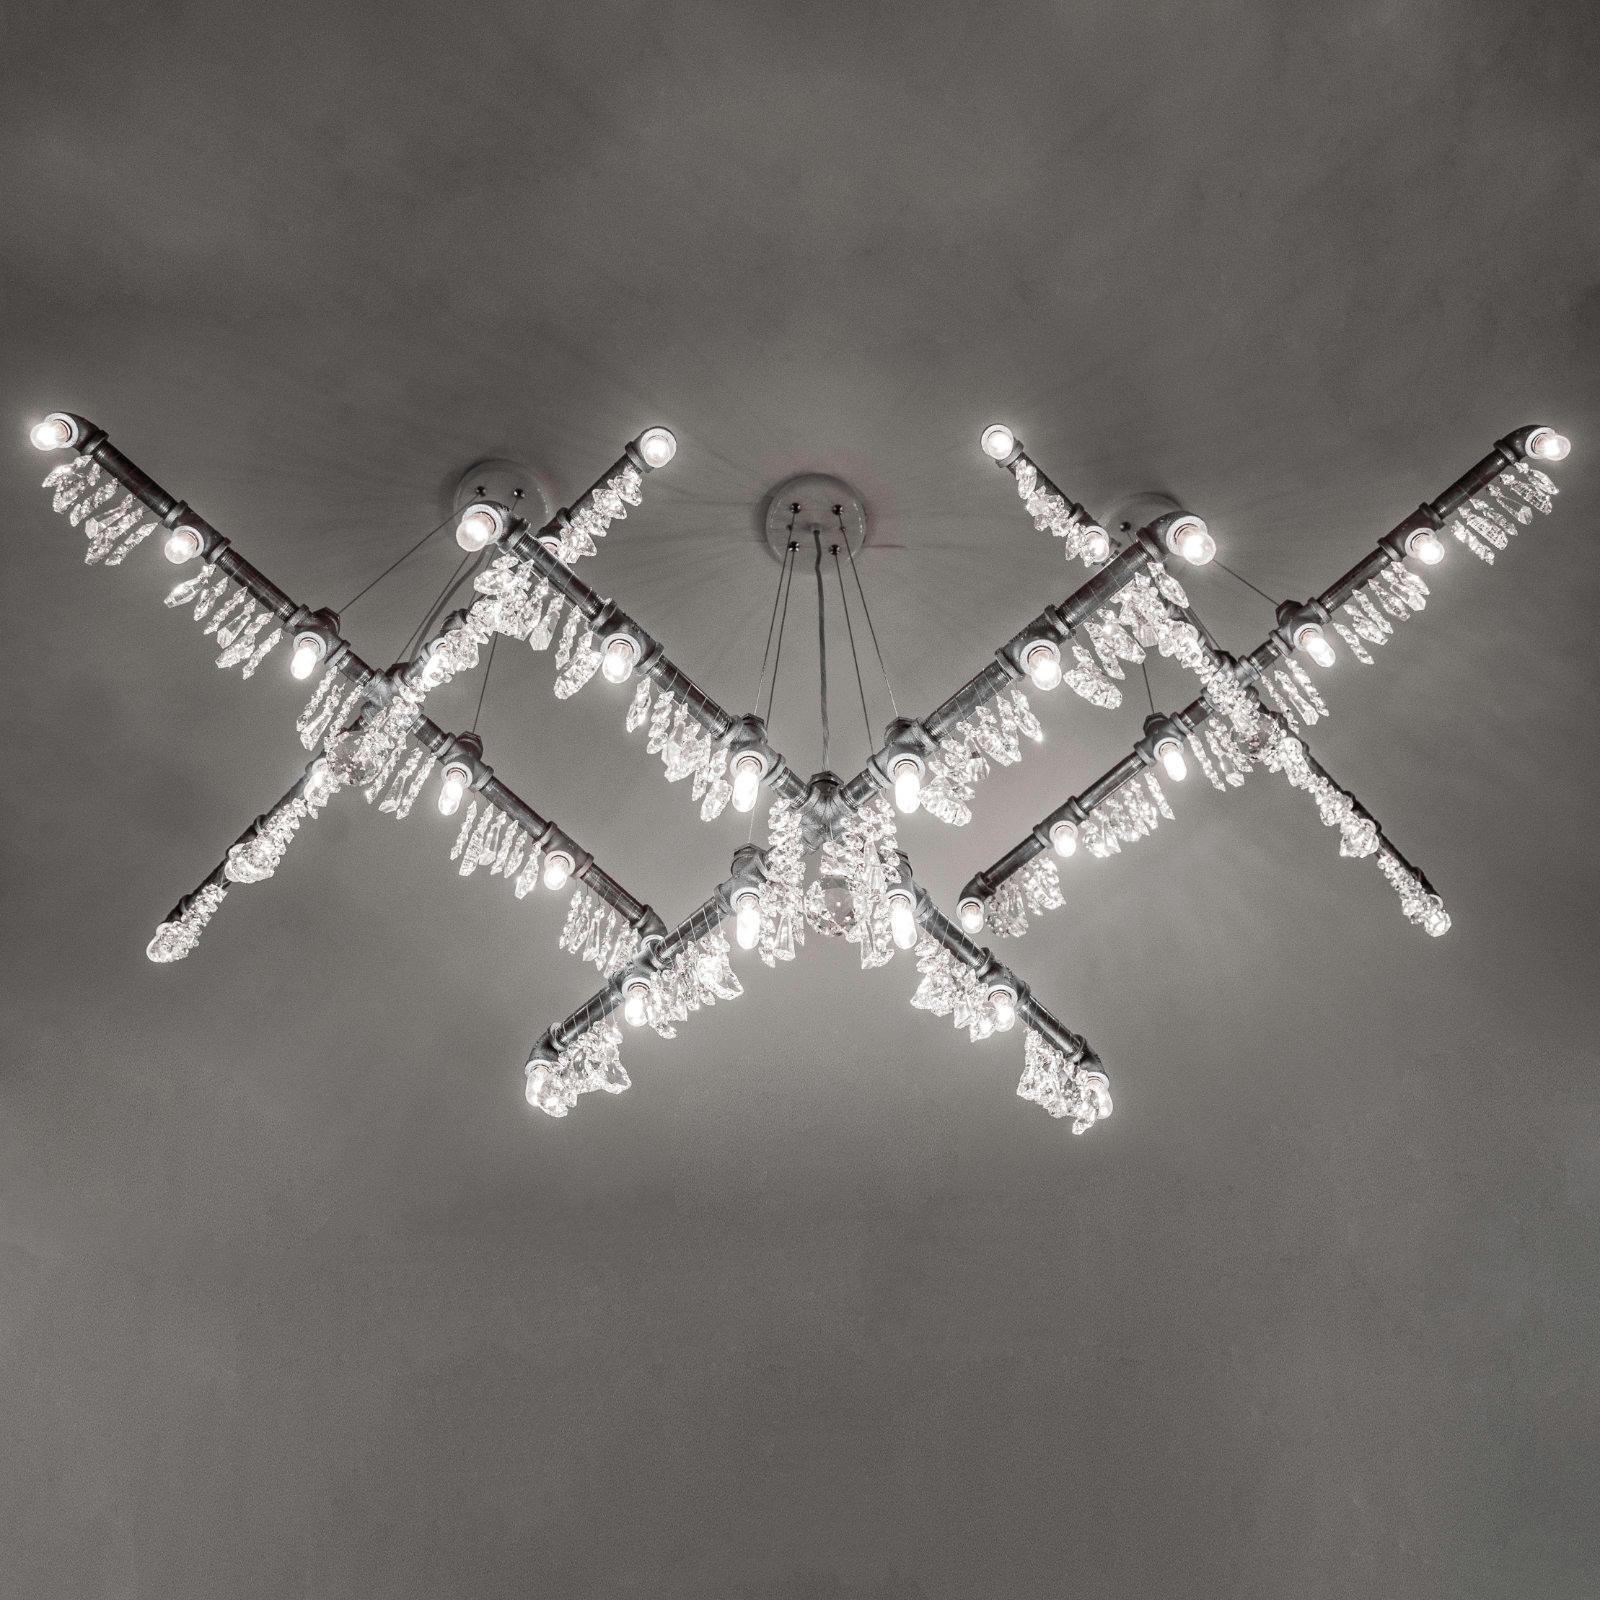 Tribeca Black Steel and Crystal Industrial X-Chandelier Pendant For Sale 1